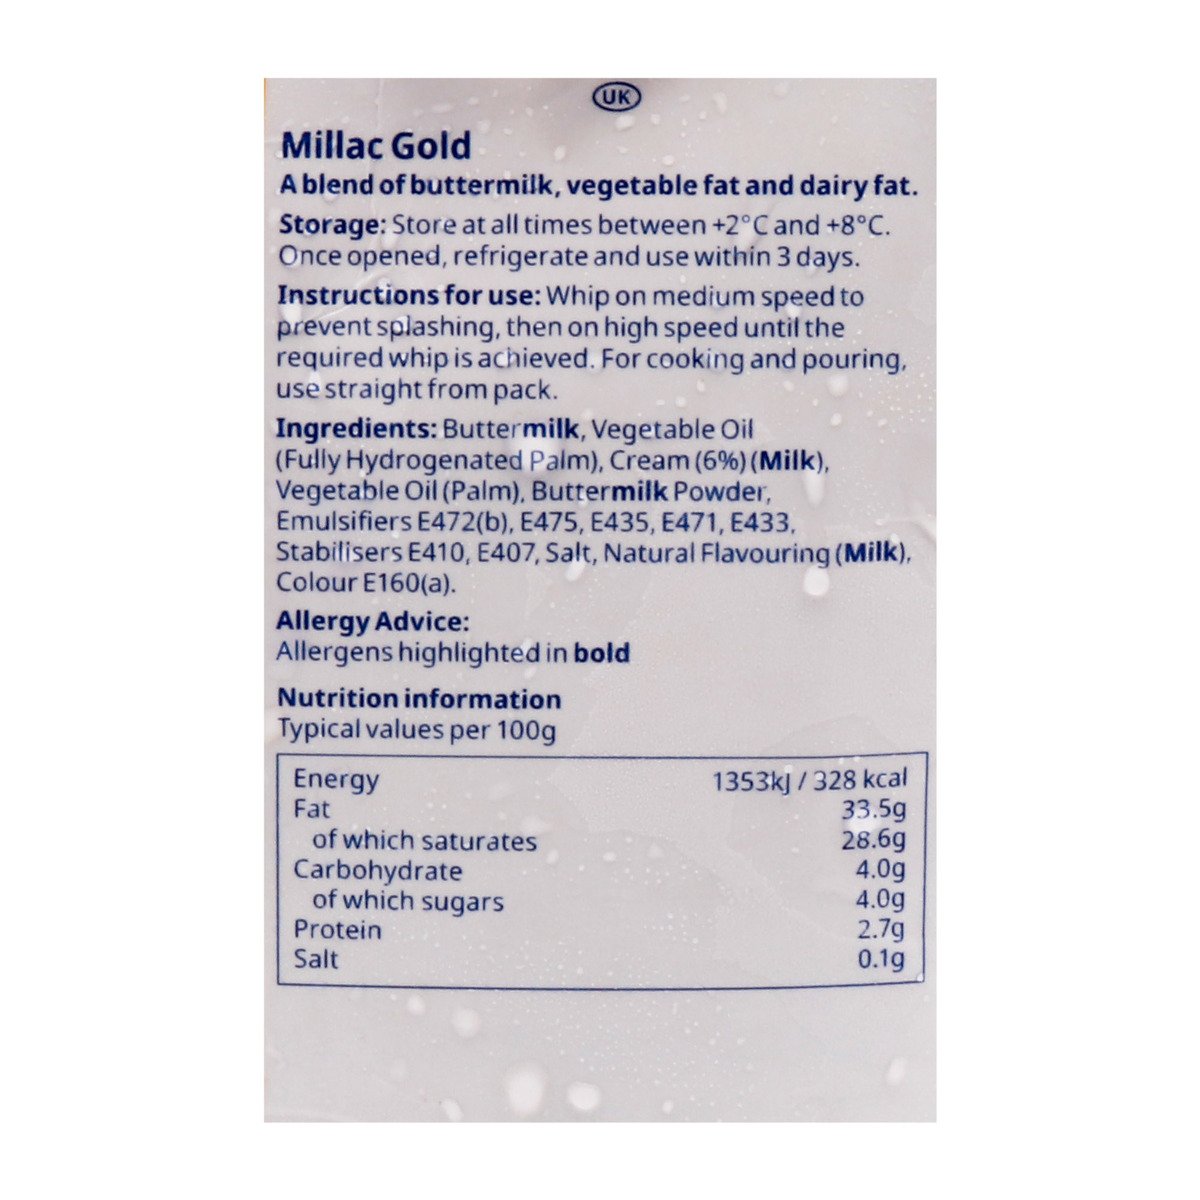 Millac Whipping, Cooking & Pouring Gold 1 Litre